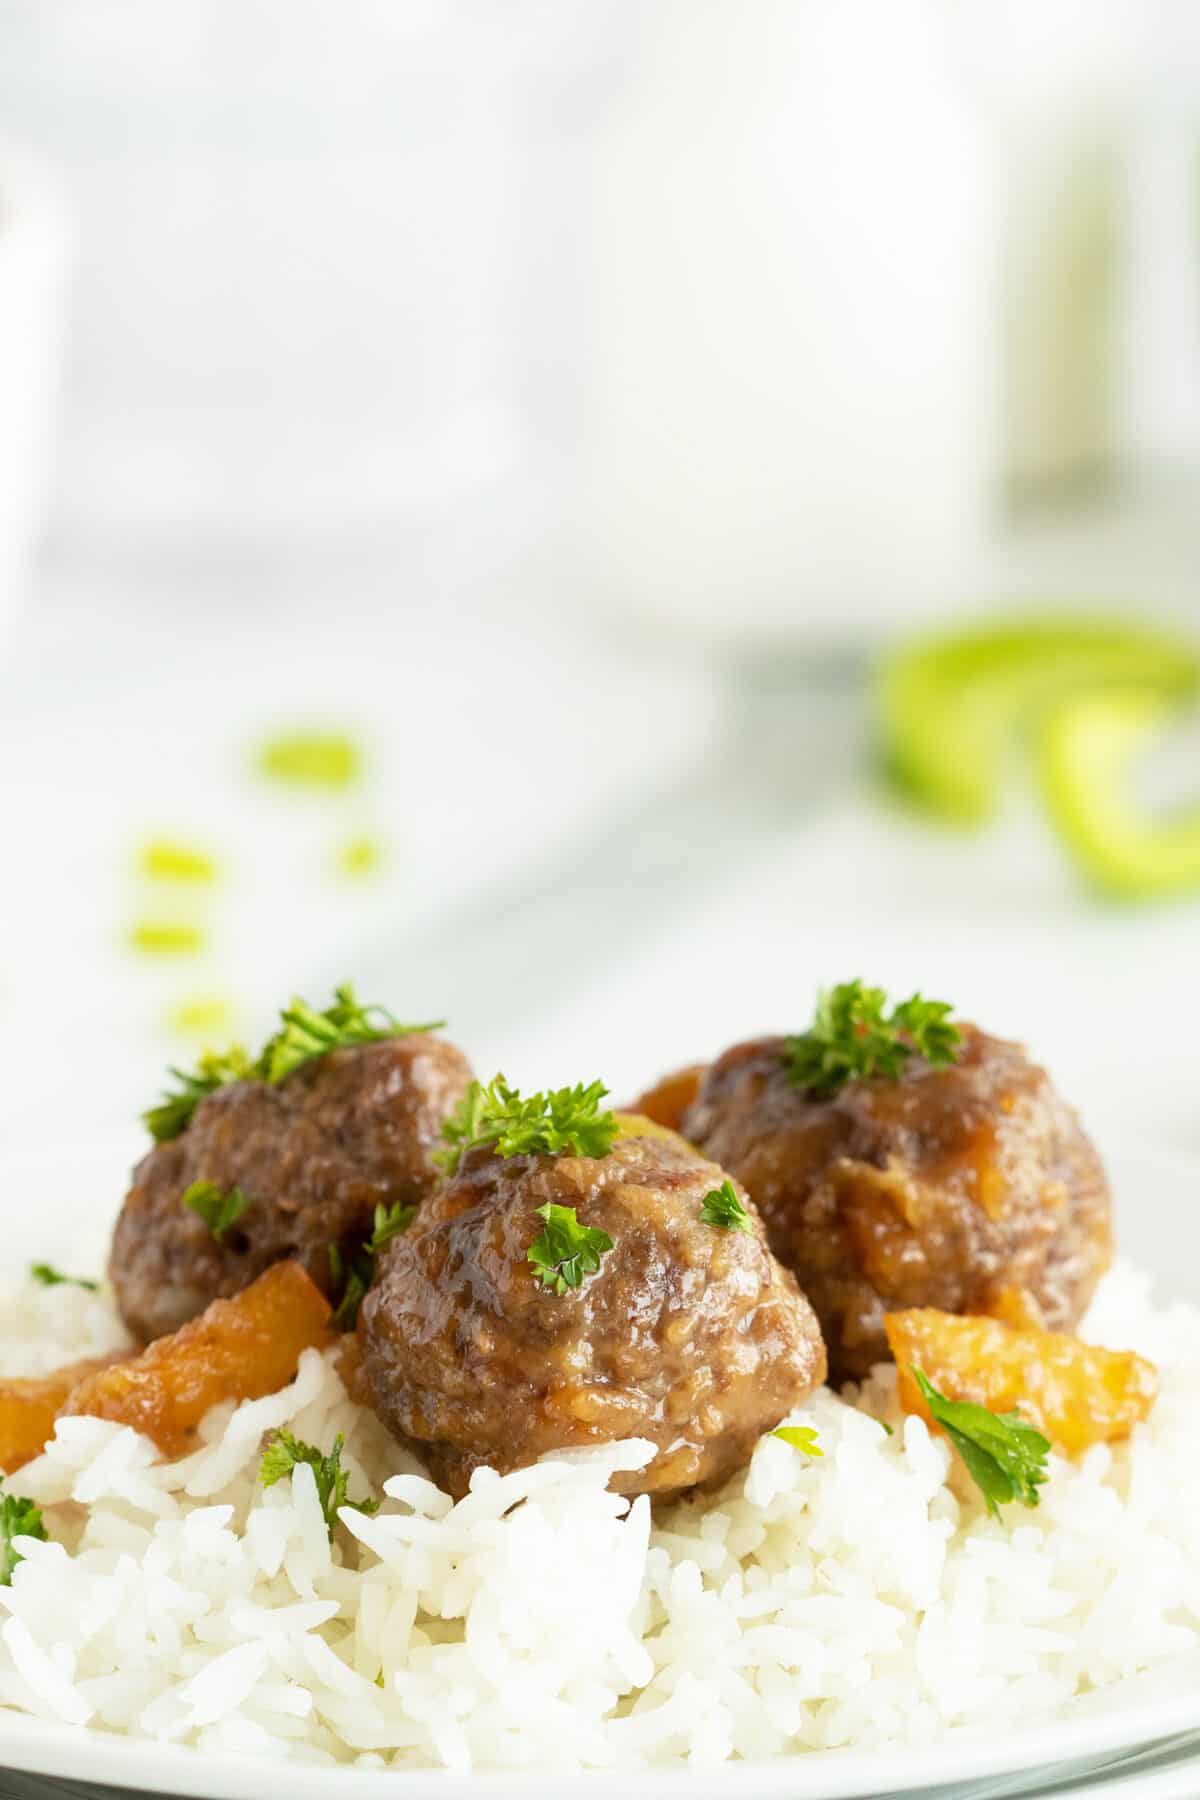 Hawaiian meatballs on a bed of white rice